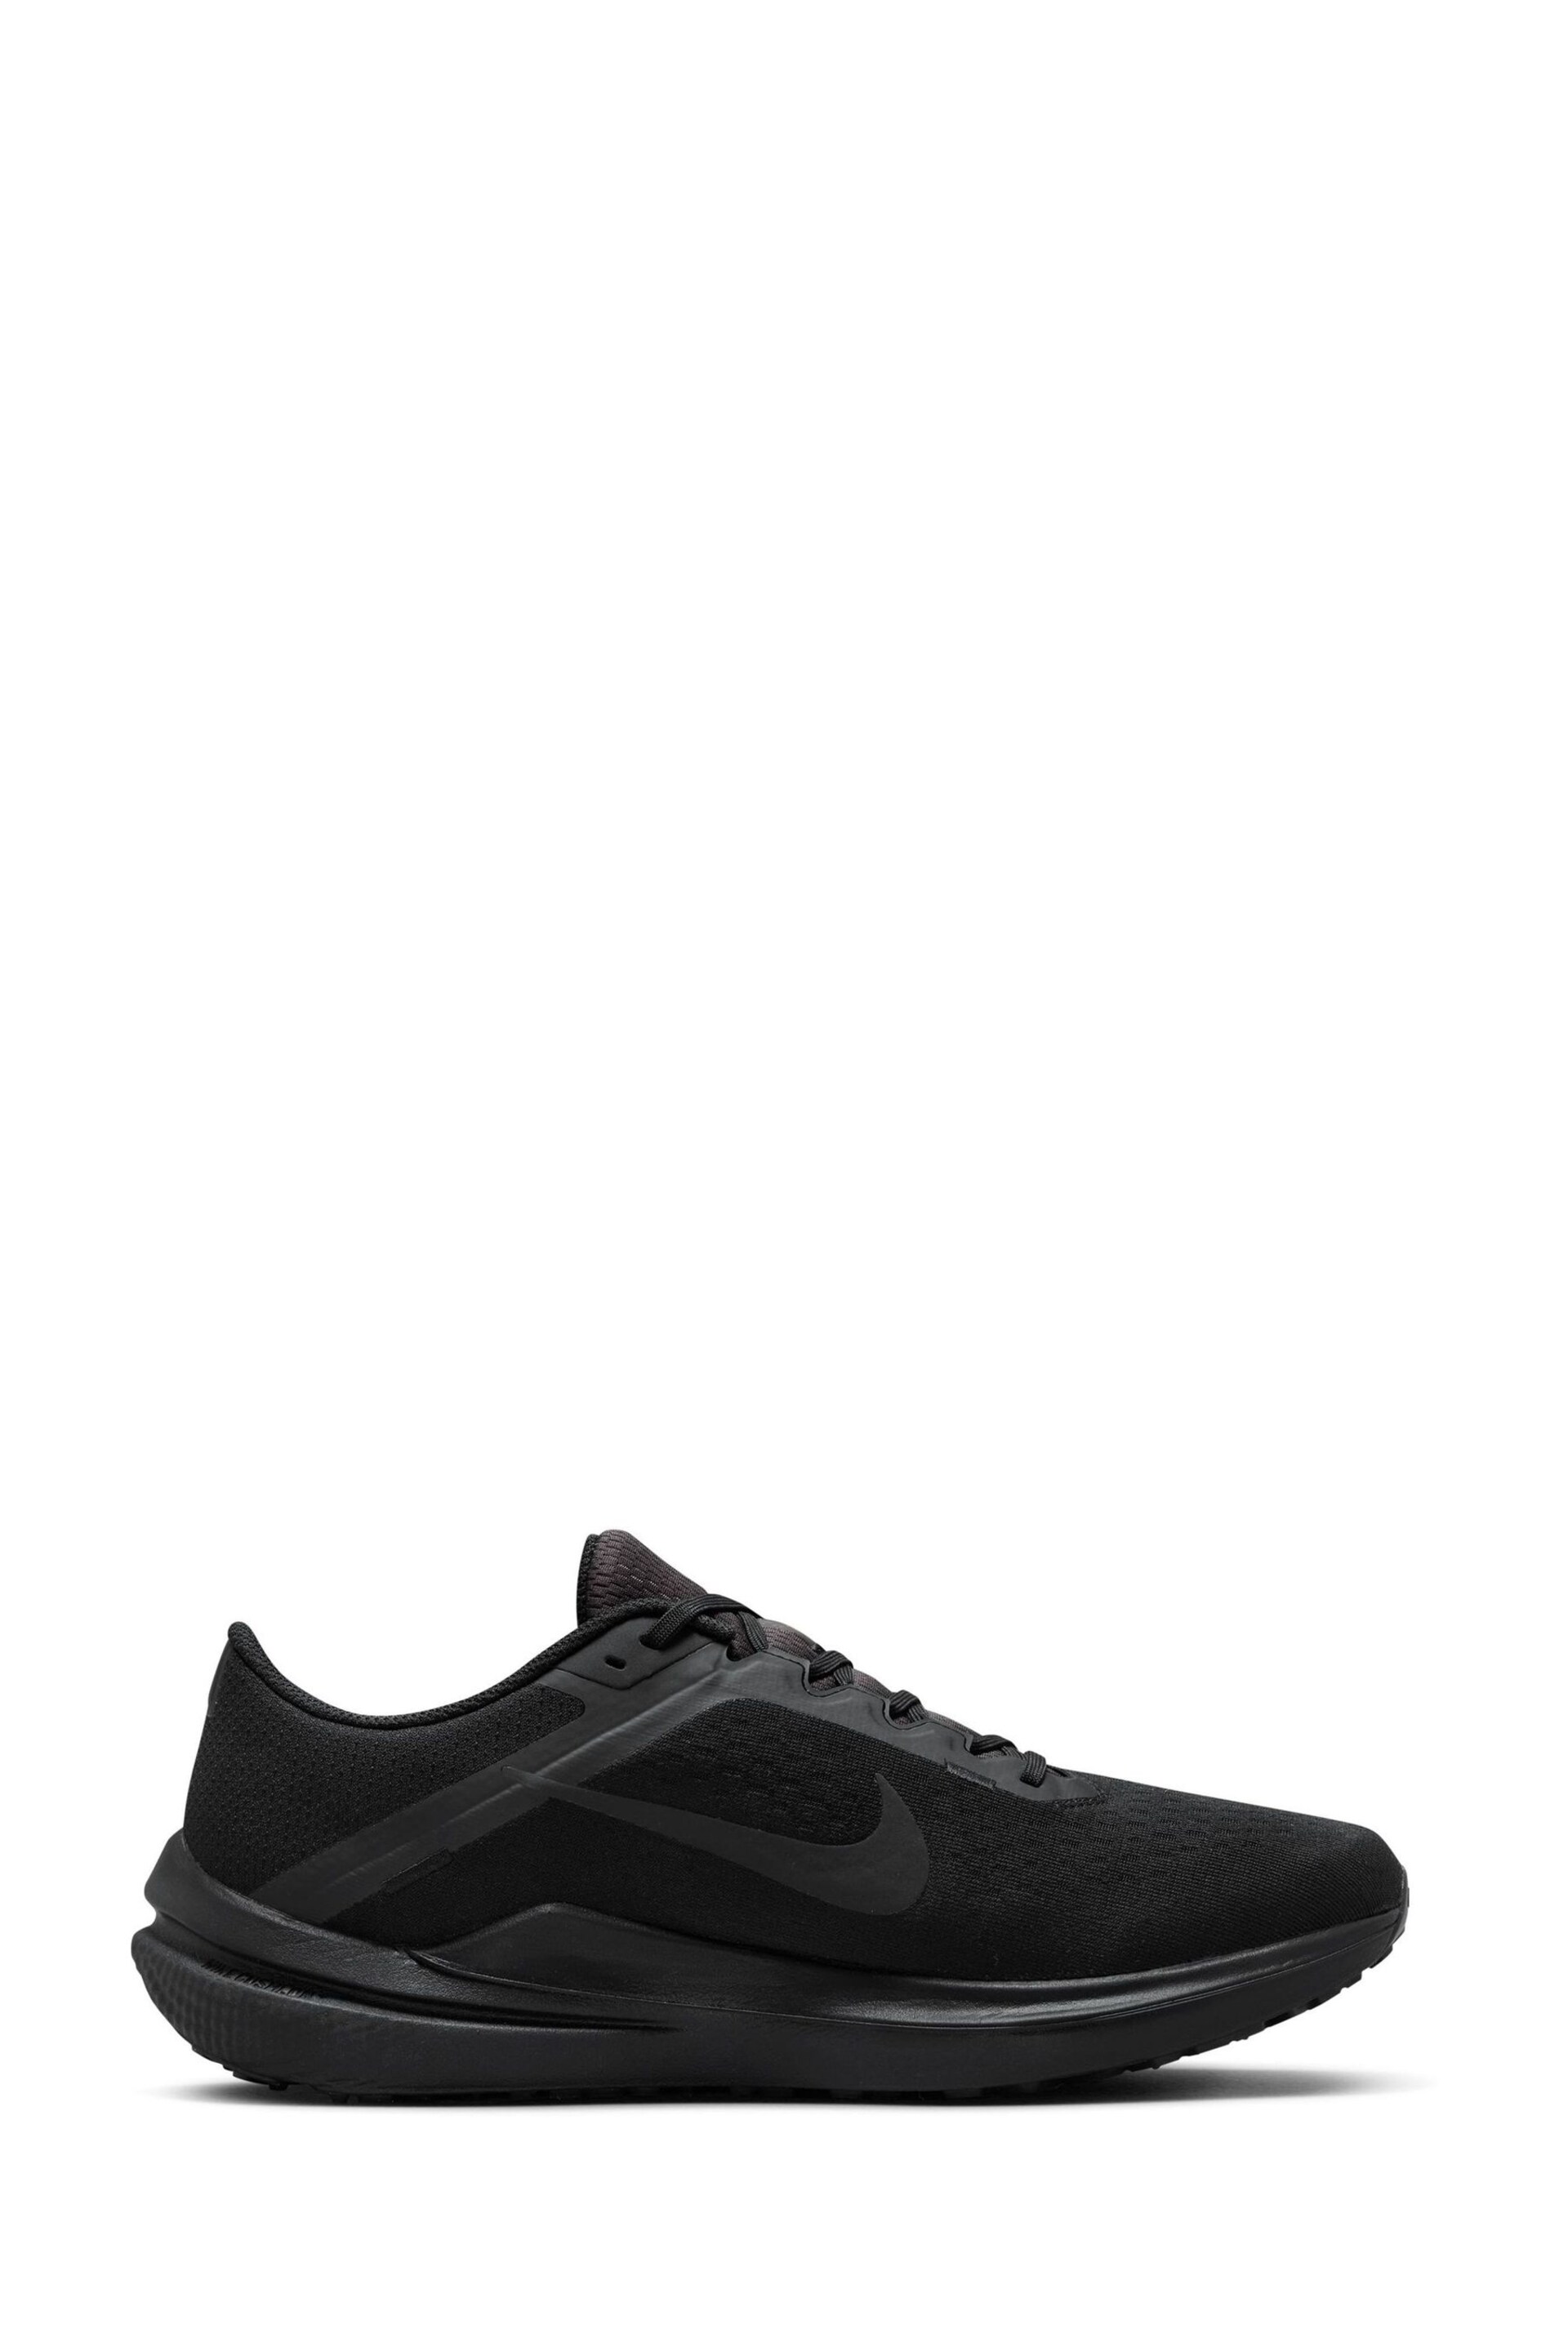 Nike Black Air Winflo 10 Running Trainers - Image 4 of 11